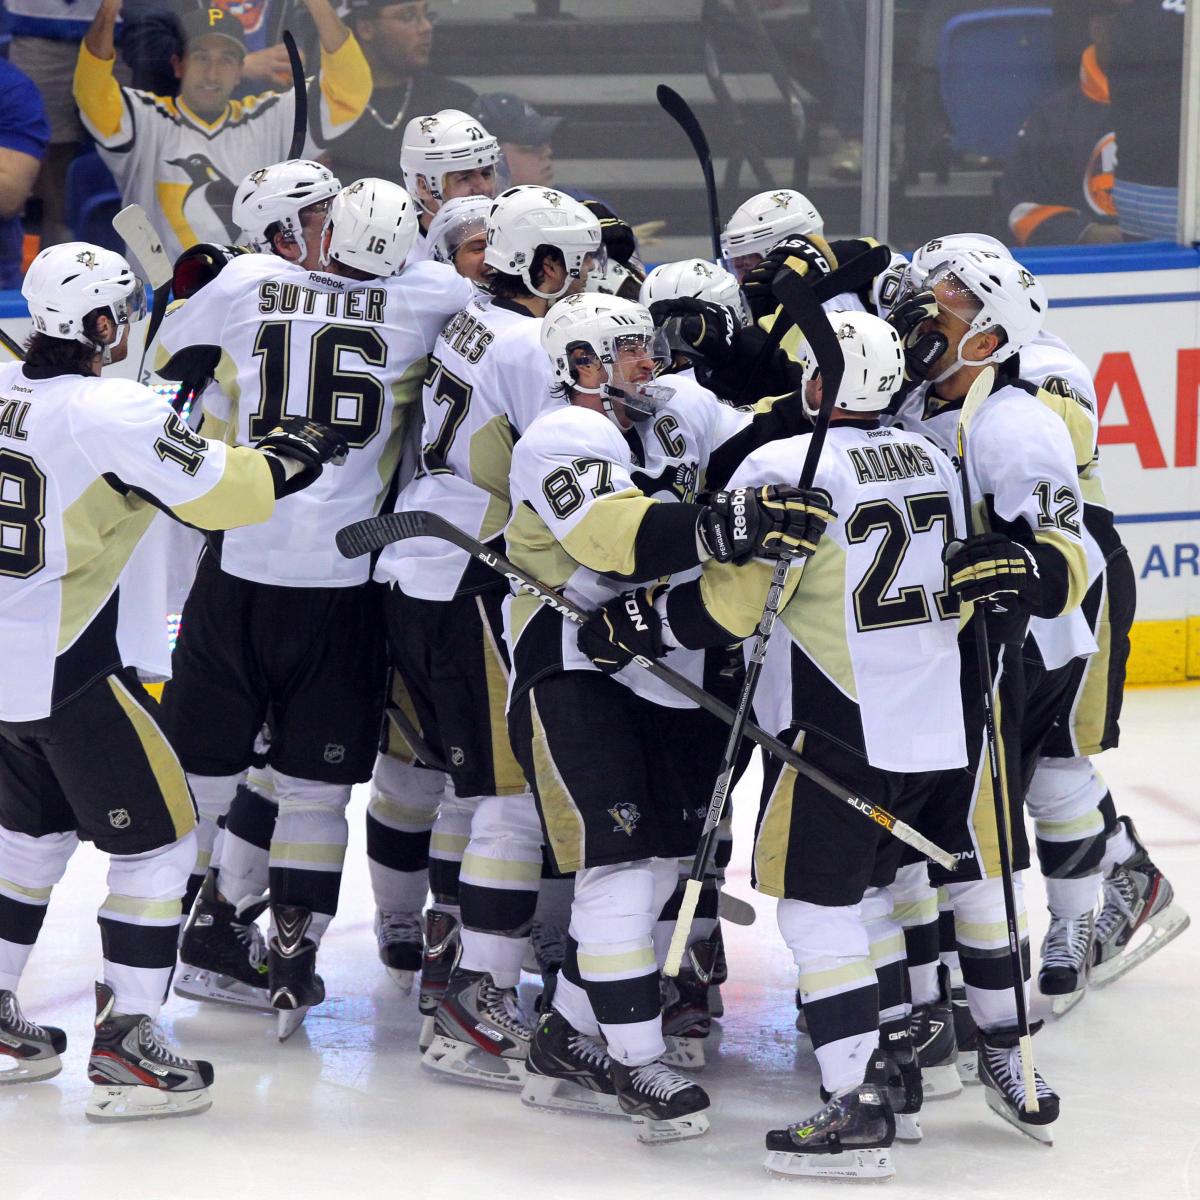 STANLEY CUP PREVIEW: Red Wings, Penguins begin rematch tonight